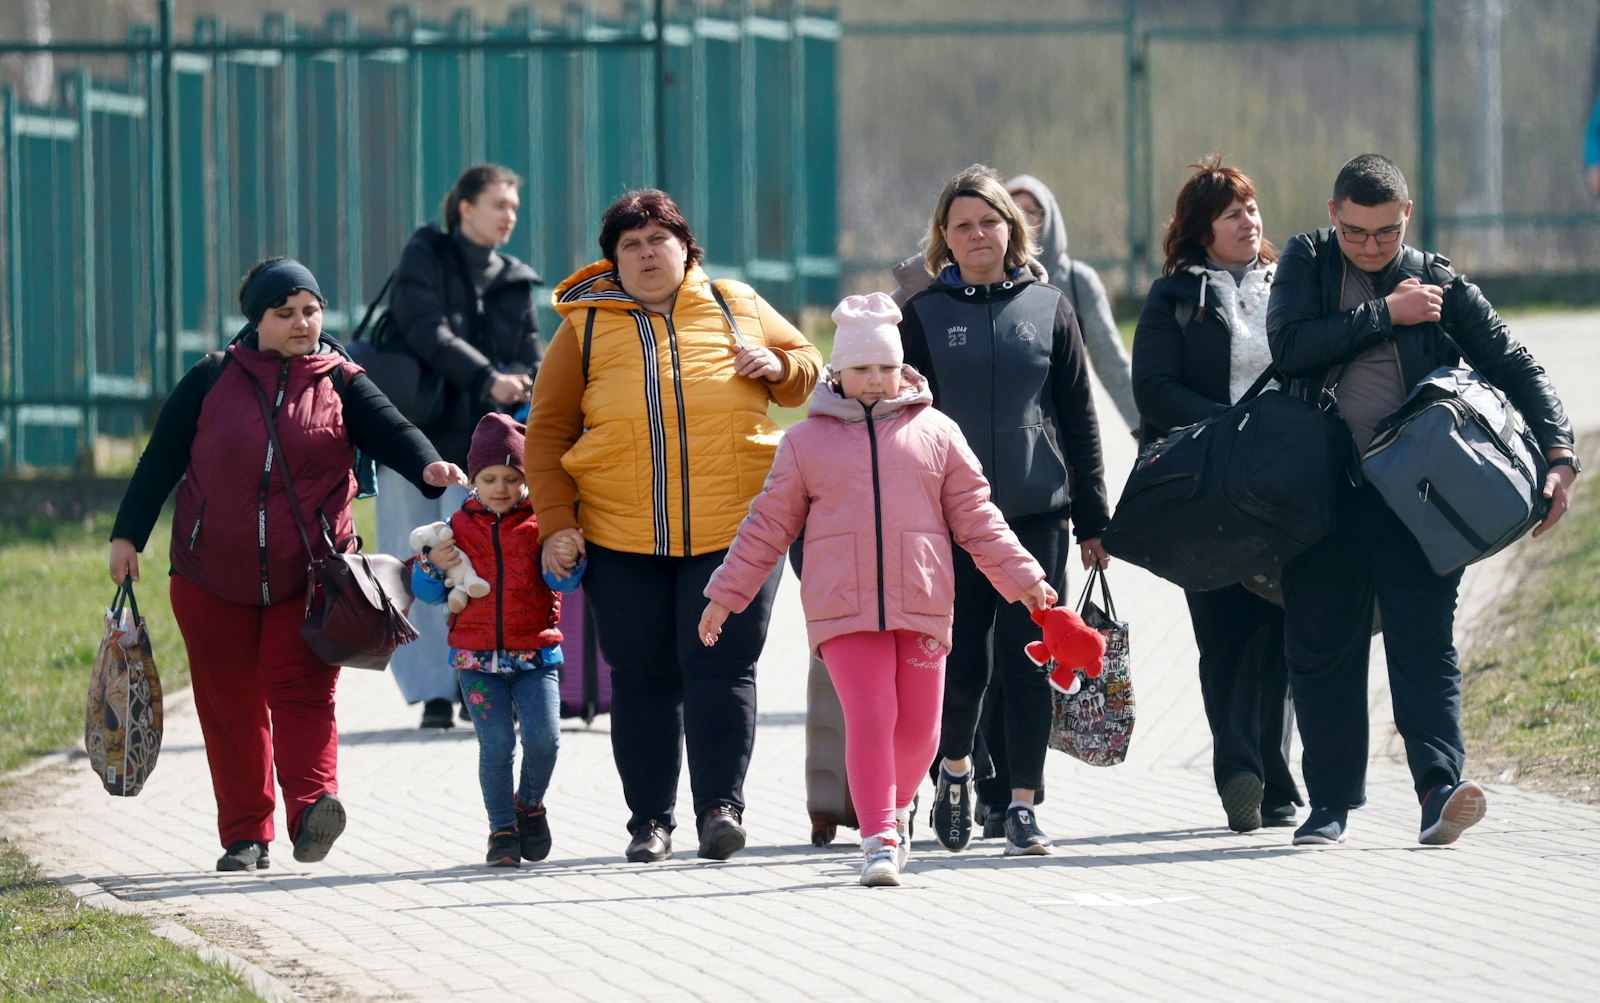 Ukrainian refugees walk after crossing the Ukraine-Poland border in Medyka, Poland, April 12, 2022, after fleeing the Russian war. In Poland, the ecumenical L'Arche community in Wroclaw, are helping Ukrainian refugees, including those with developmental disabilities. (CNS photo/Leonhard Foeger, Reuters)